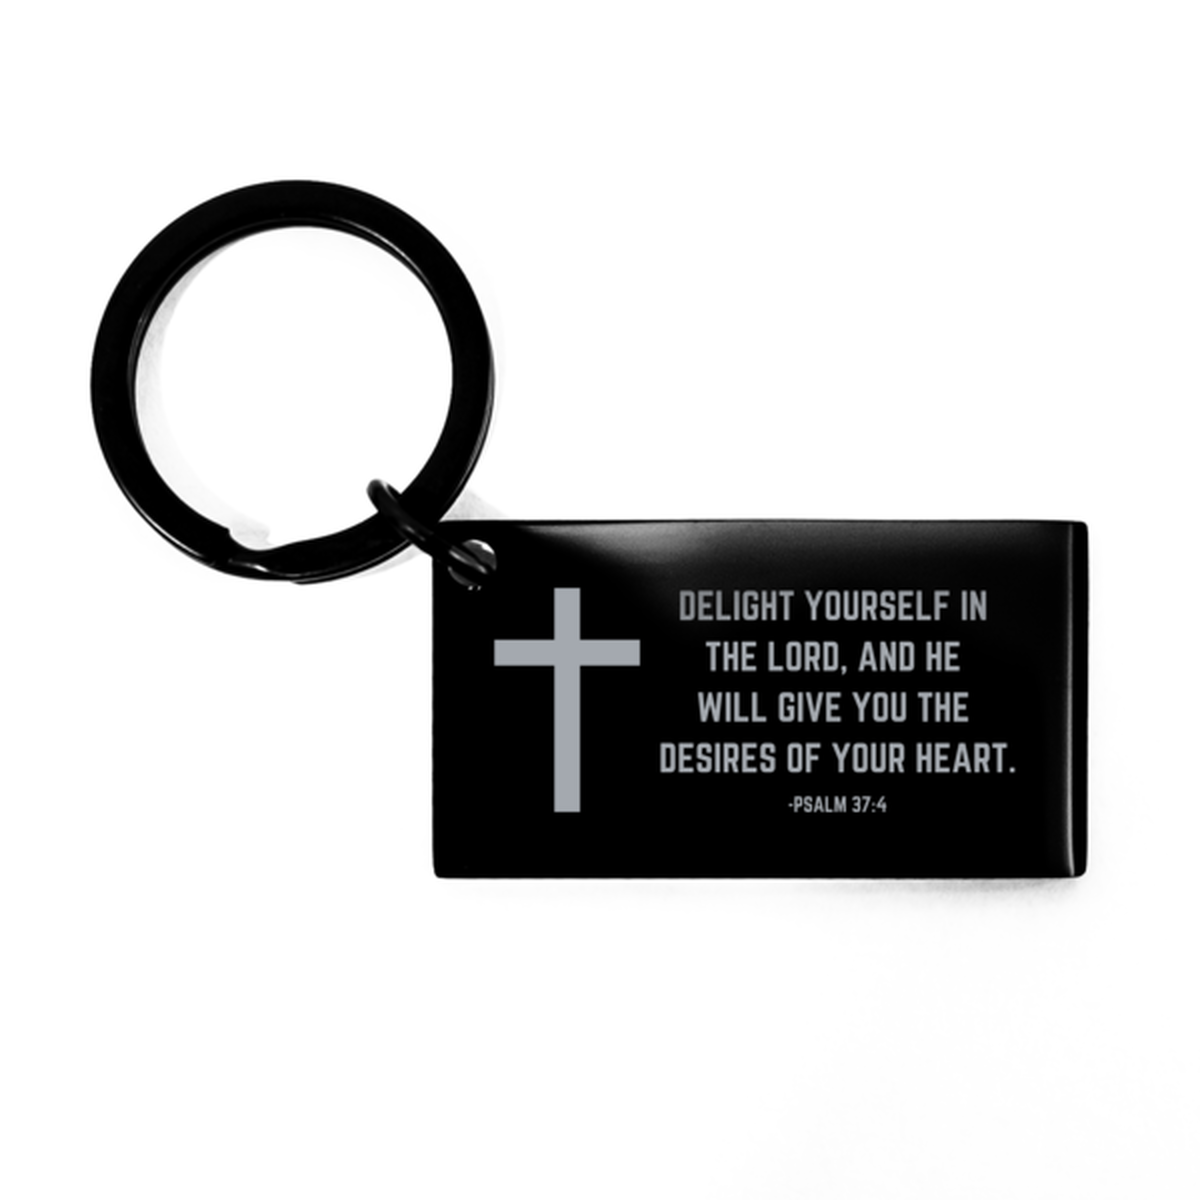 Baptism Gifts For Teenage Boys Girls, Christian Bible Verse Black Keychain, Delight yourself in the Lord, Confirmation Gifts, Bible Verse Keyring for Son, Godson, Grandson, Nephew